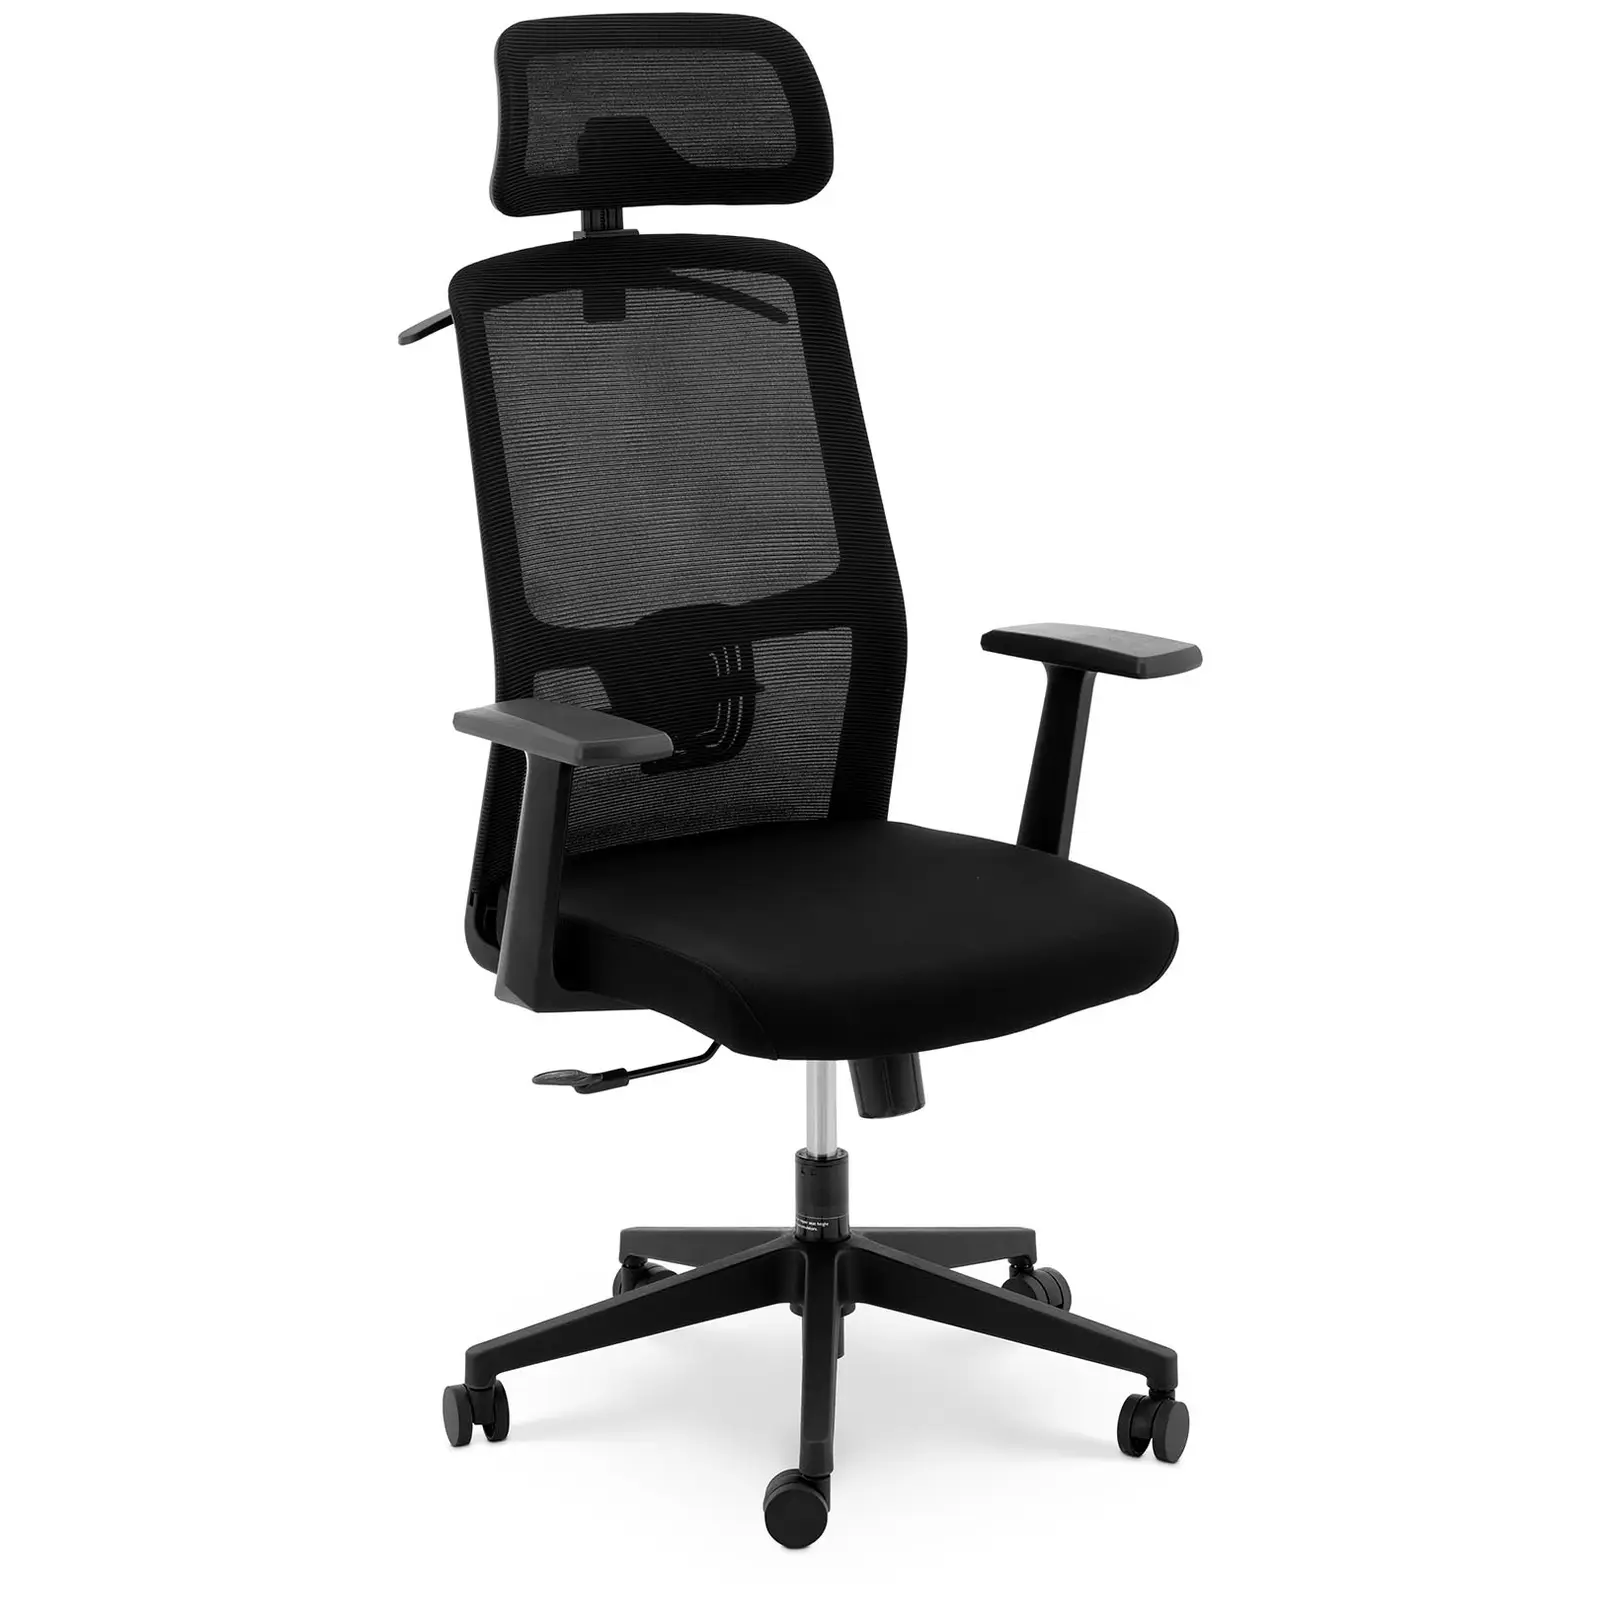 Office Chair - mesh back - headrest - 50 x 50.5 cm seat - up to 150 kg - black / blue / grey